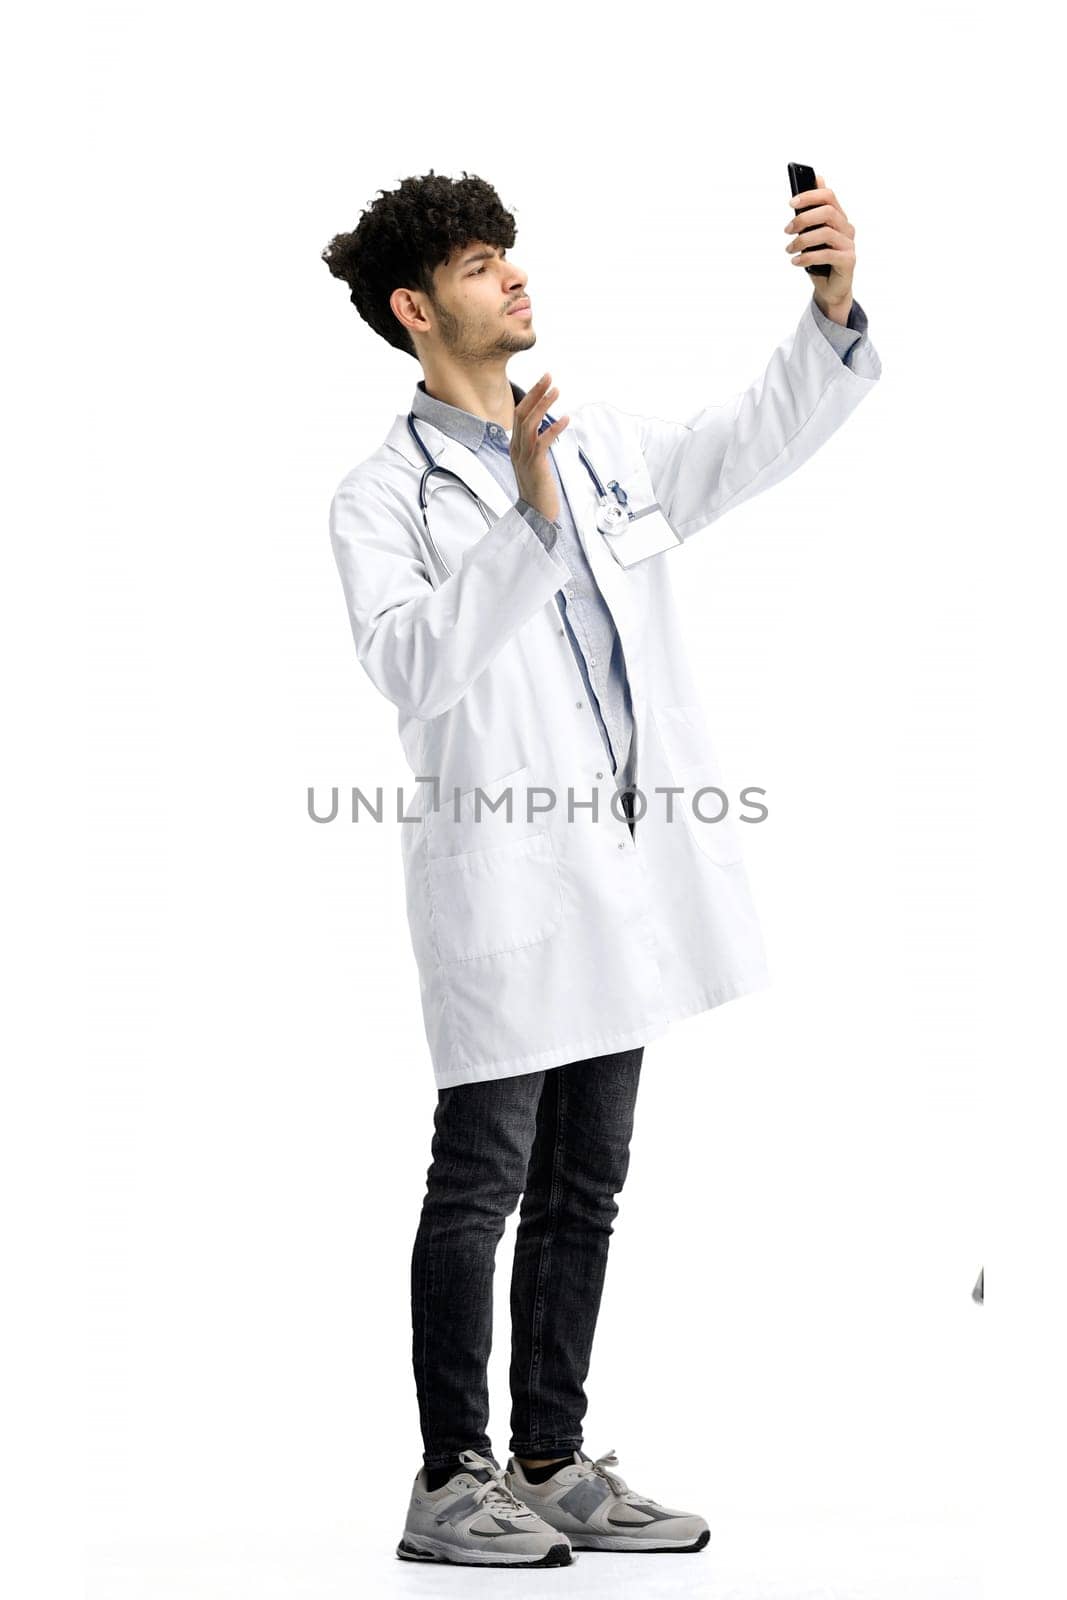 Male doctor, on a white background, full-length, with a phone.